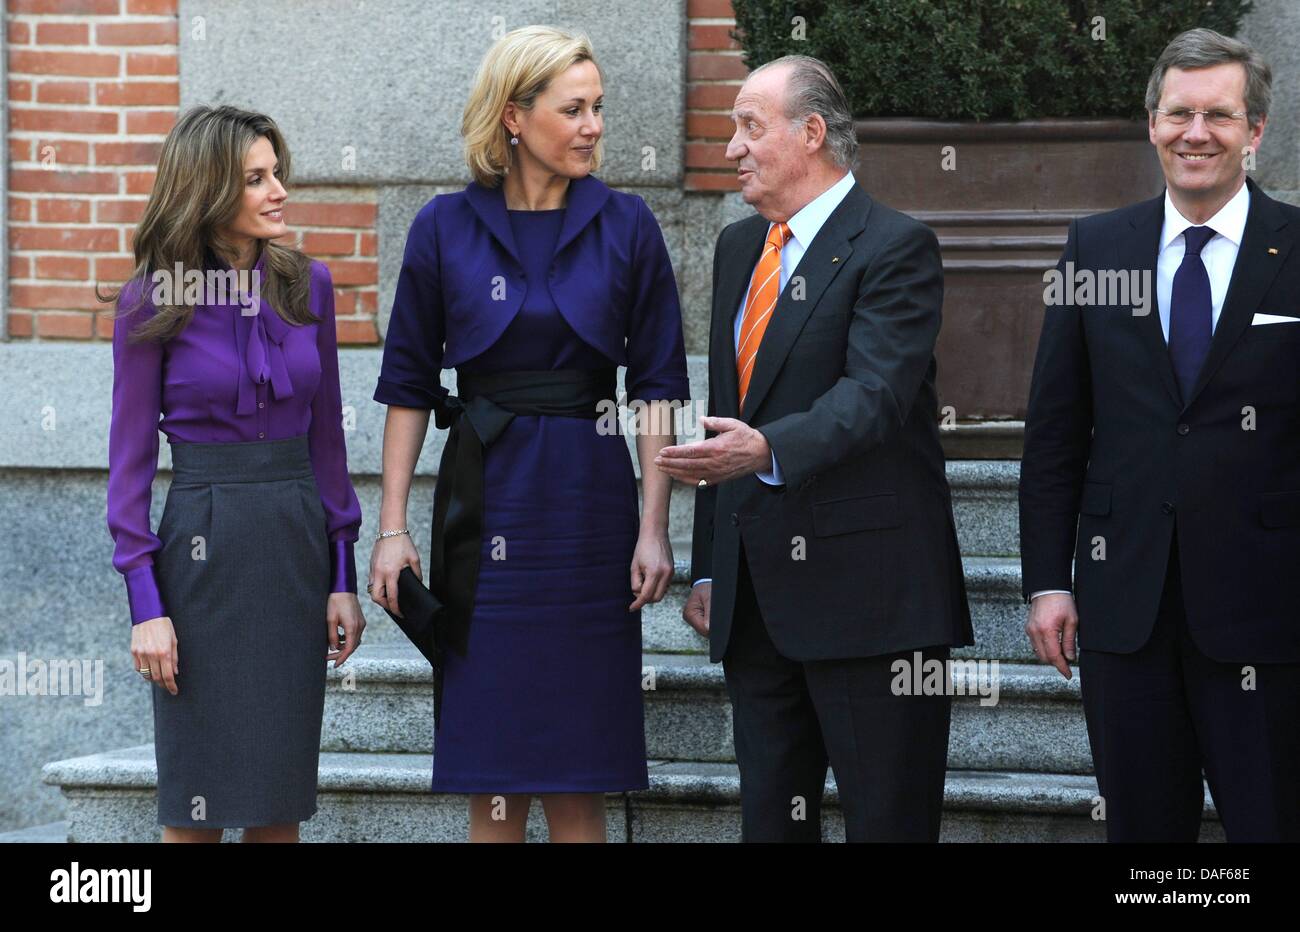 King Juan Carlos of Spain (2-R) and Princess Letizia of Spain (L) chat with Bettina Wulff (2-L) and her husband German President Christian Wulff (R) at Zarzuela in Madrid, Spain, 10 February 2011. Mr Wulff is on inaugural visit to spain and Portugal until 11 February. Photo: RAINER JENSEN Stock Photo